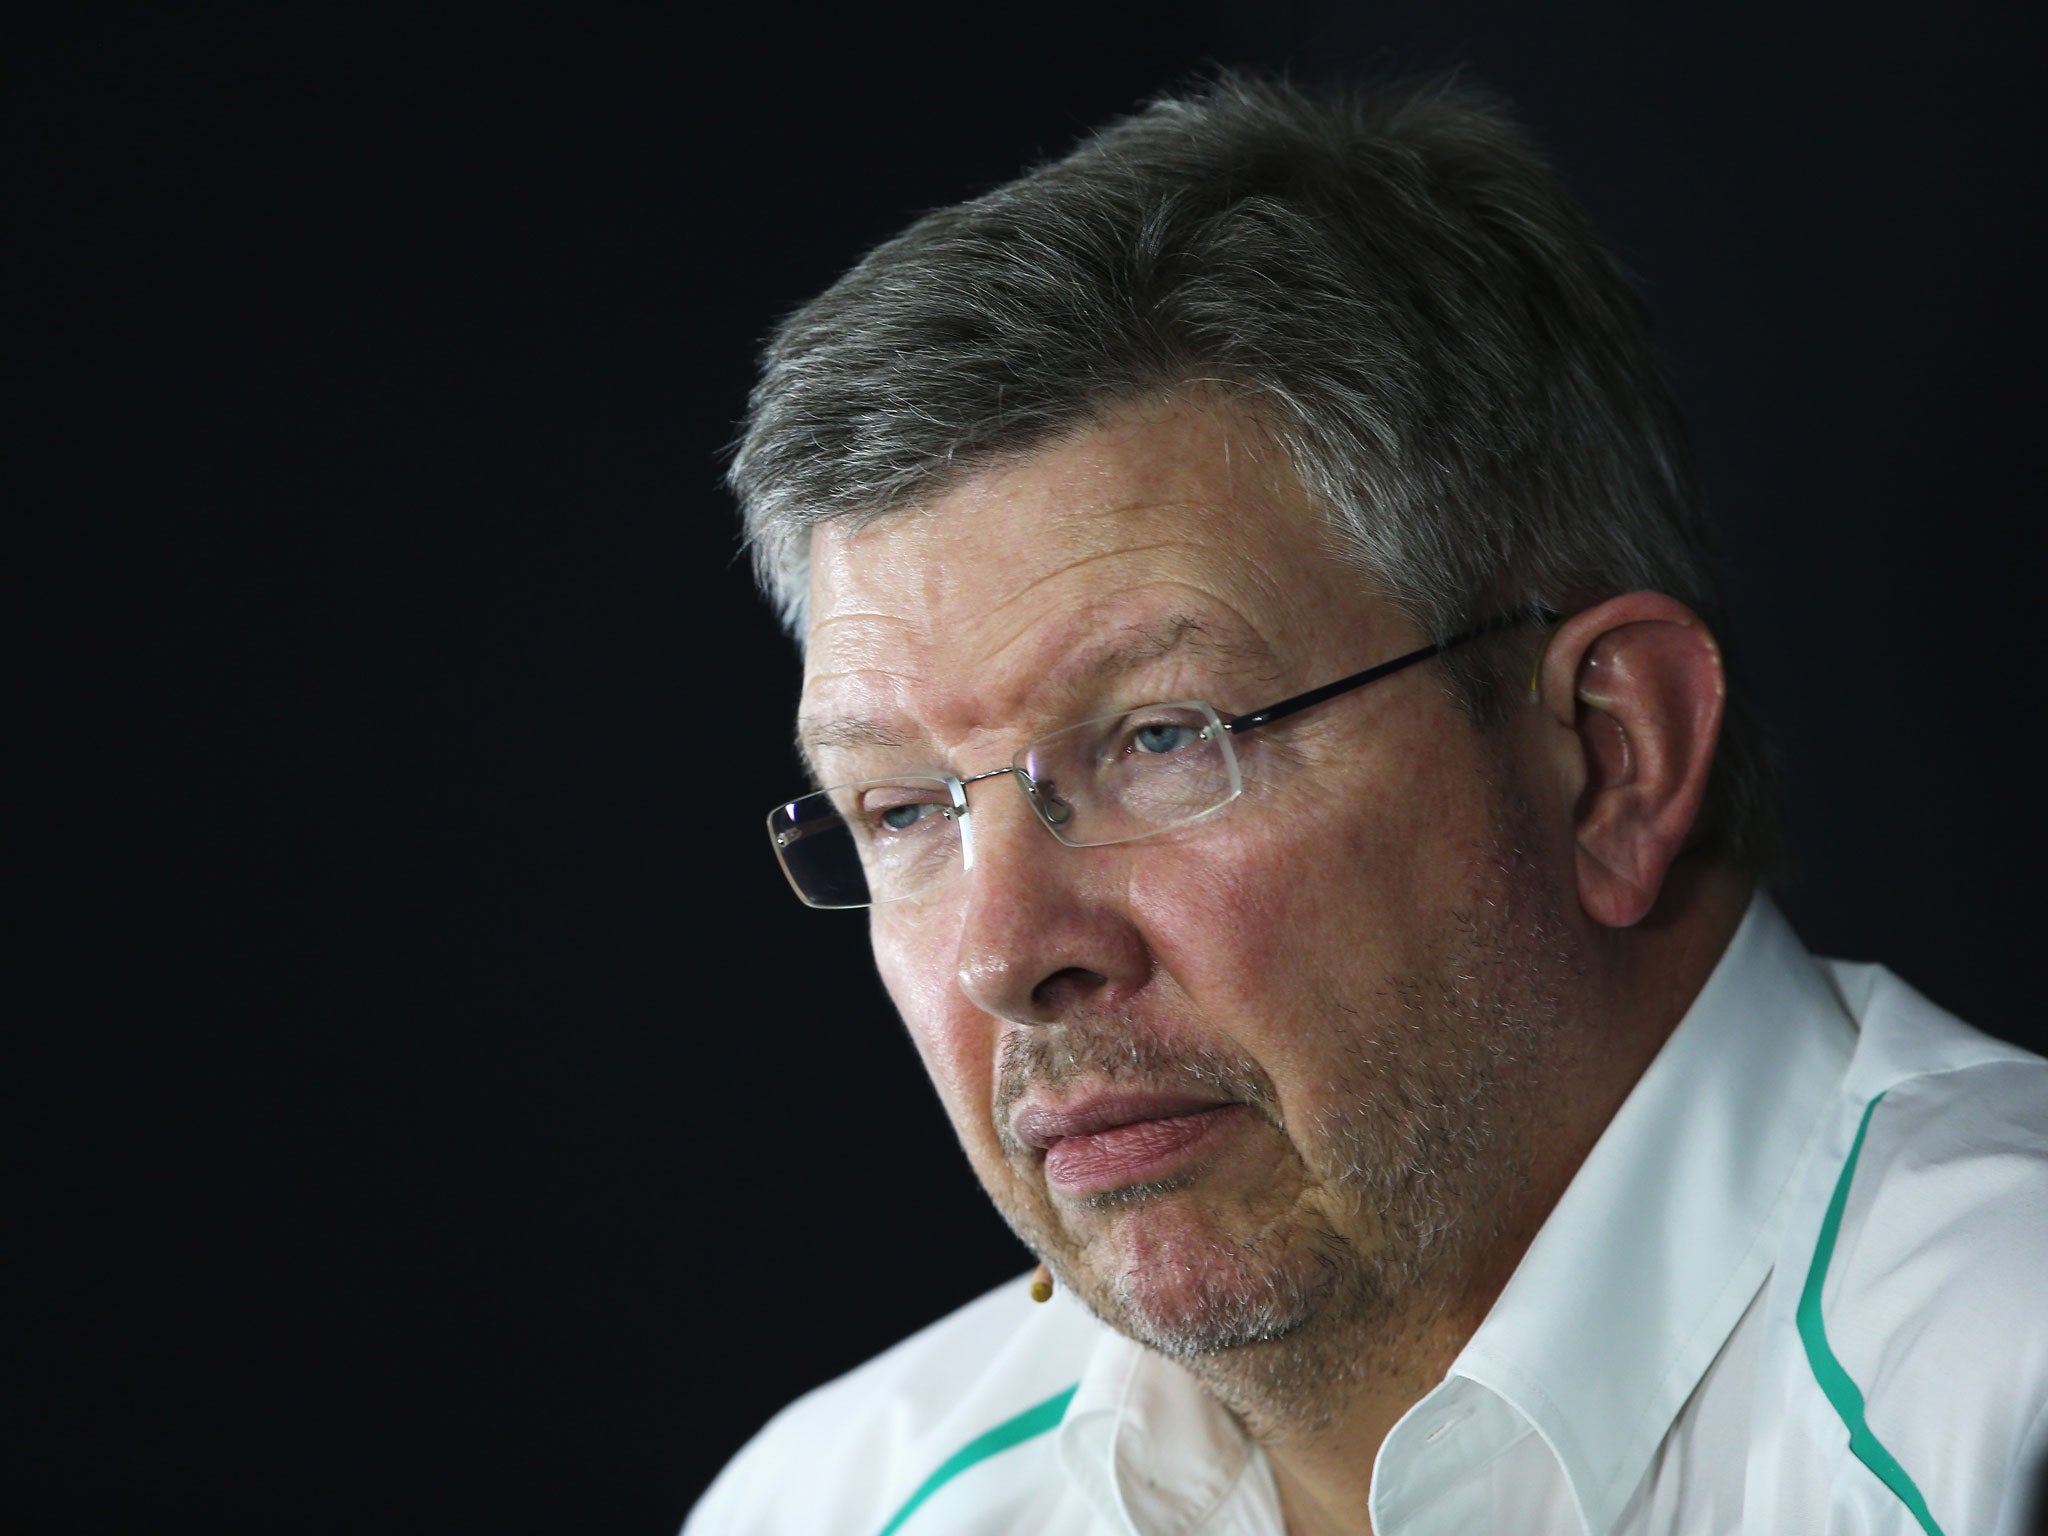 Former Benetton and Ferrari technical director Ross Brawn has been cited by Christian Horner as someone to help to revive F1's fortunes